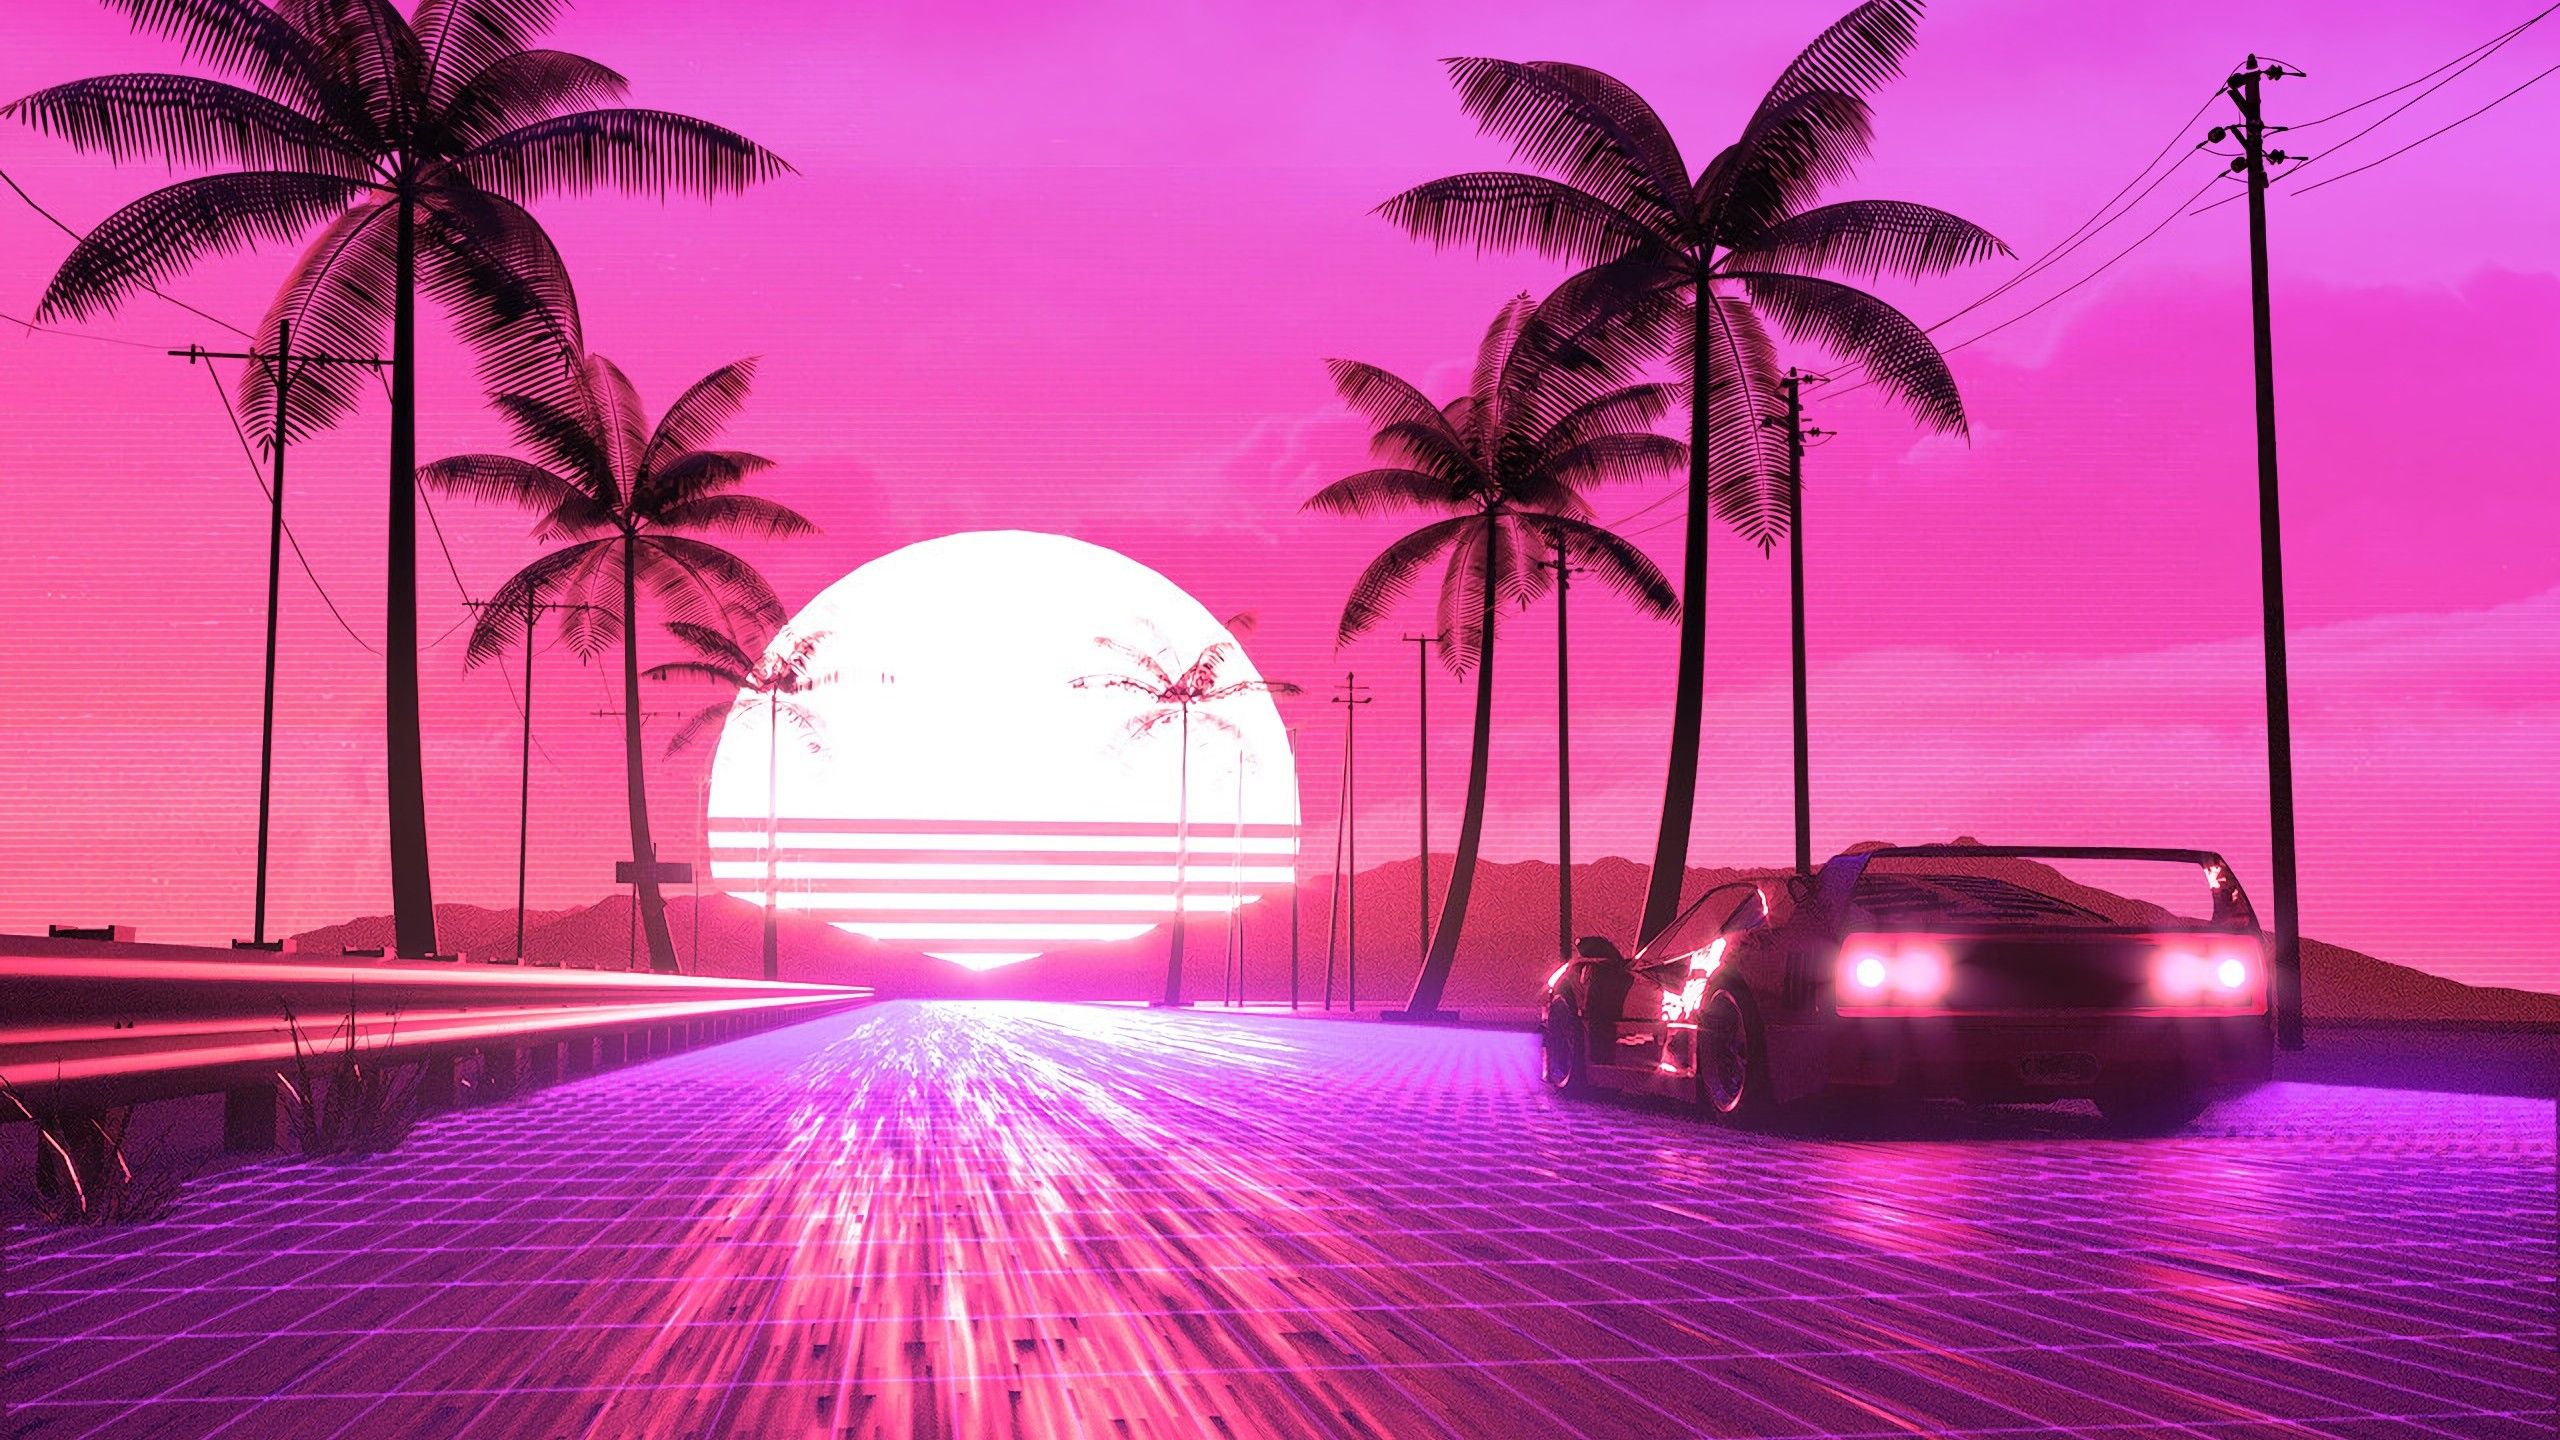 80s synthwave aesthetic wallpaper 4k for your phone and desktop background - 80s, 2560x1440